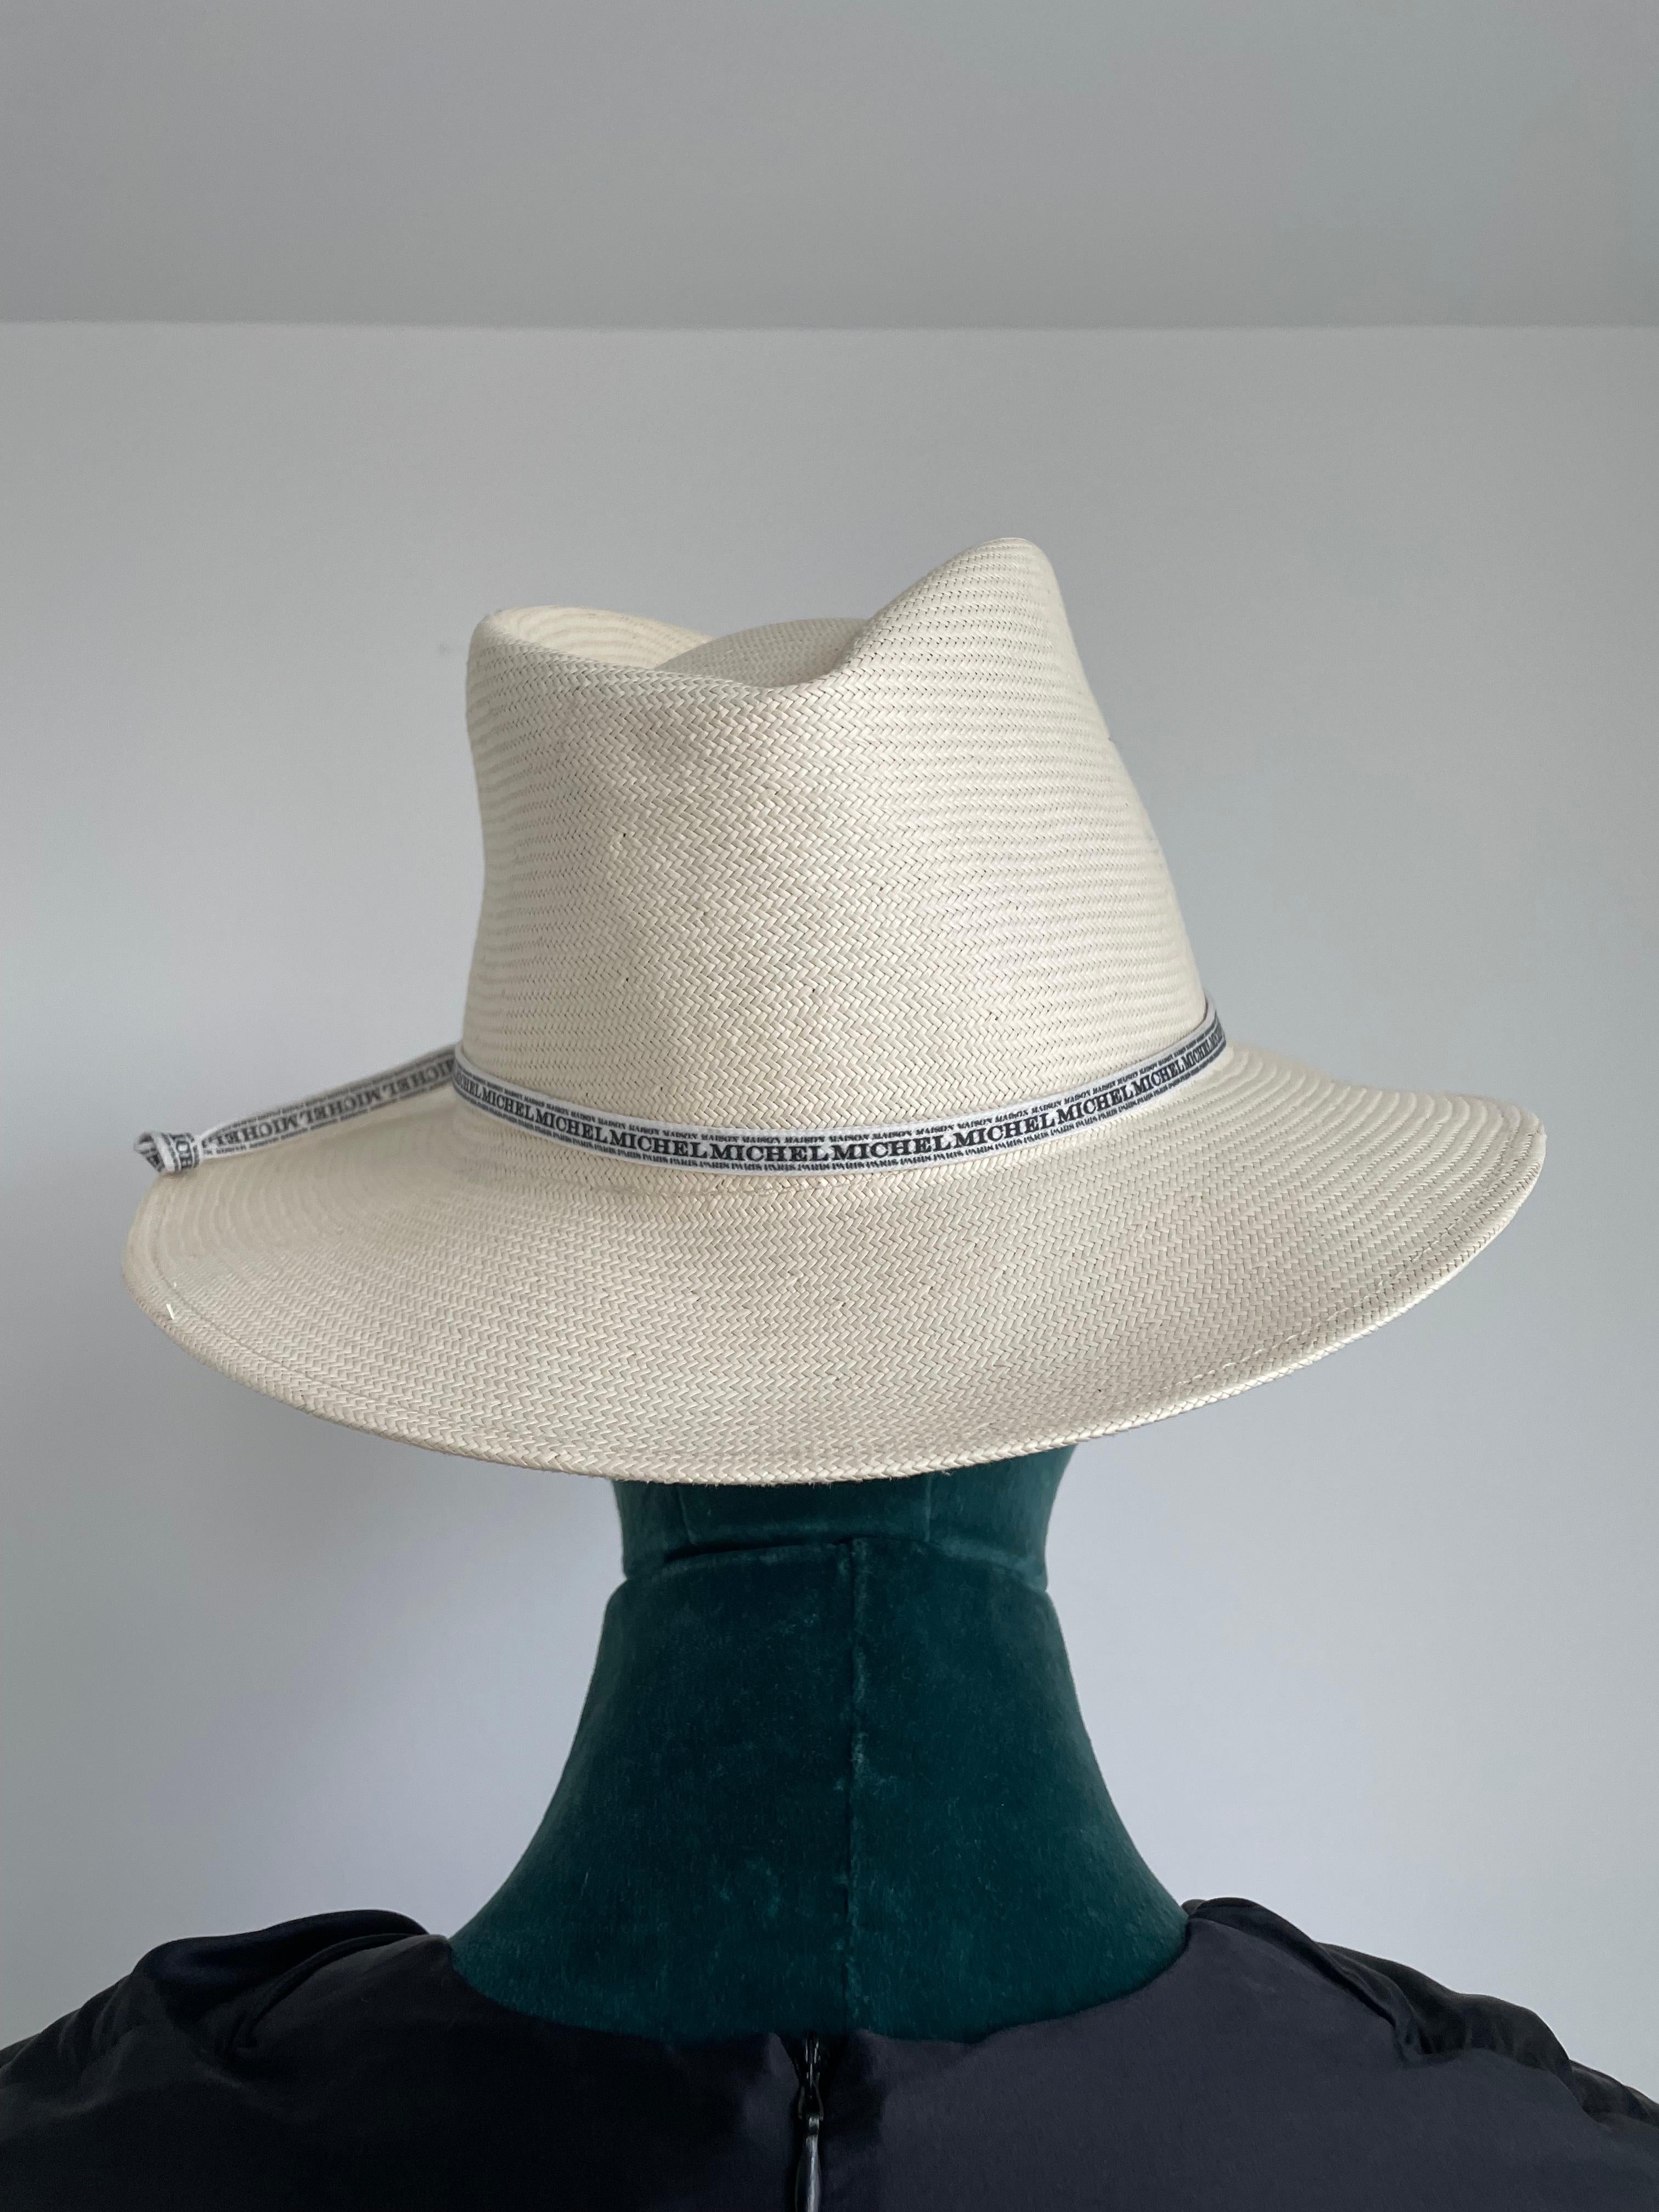 Stylish Design:
The Rollable Fedora Hat by Maison Michel André is designed to effortlessly blend fashion and functionality. The timeless fedora silhouette, with its pinched crown and slightly downturned brim, exudes sophistication and adds a touch